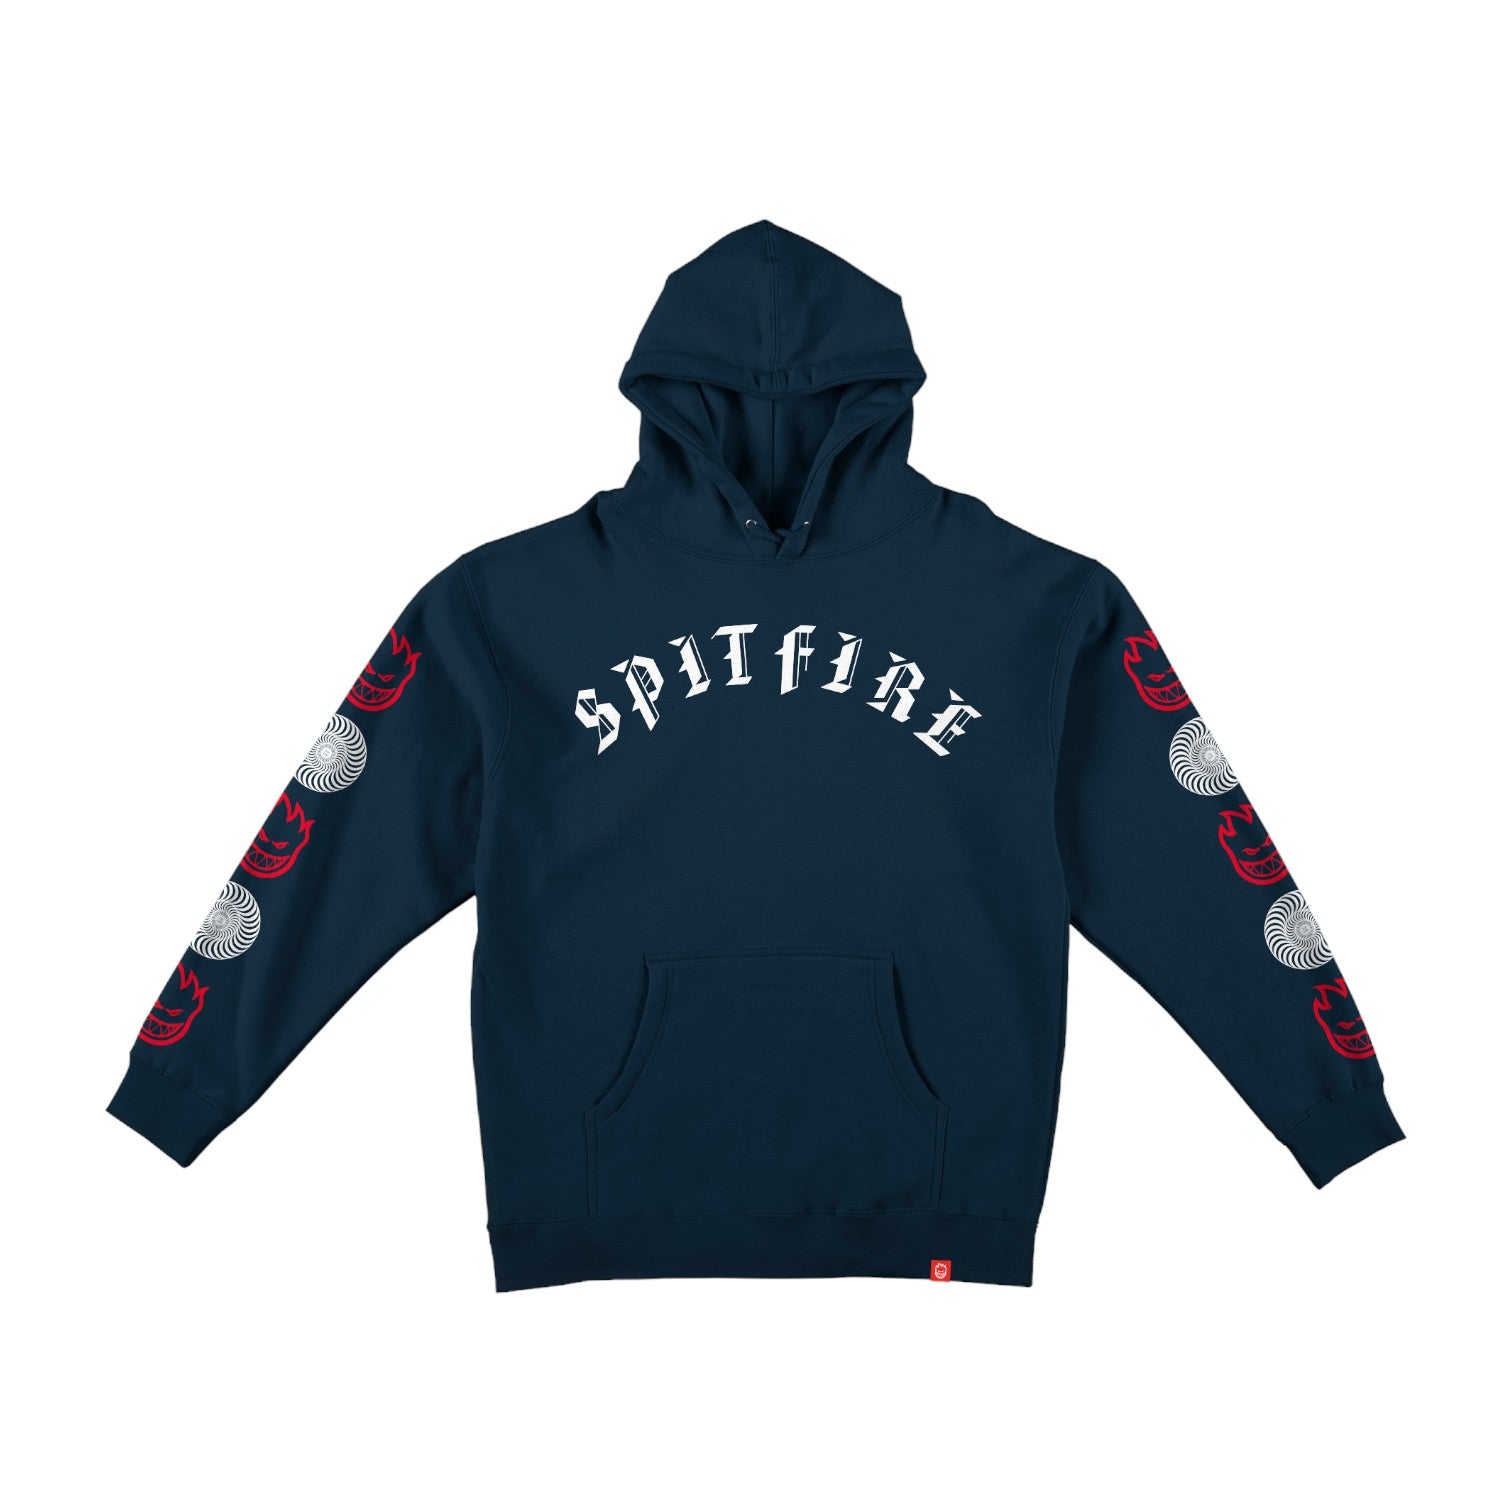 Spitfire Old E Combo Sleeve Hoodie - Navy